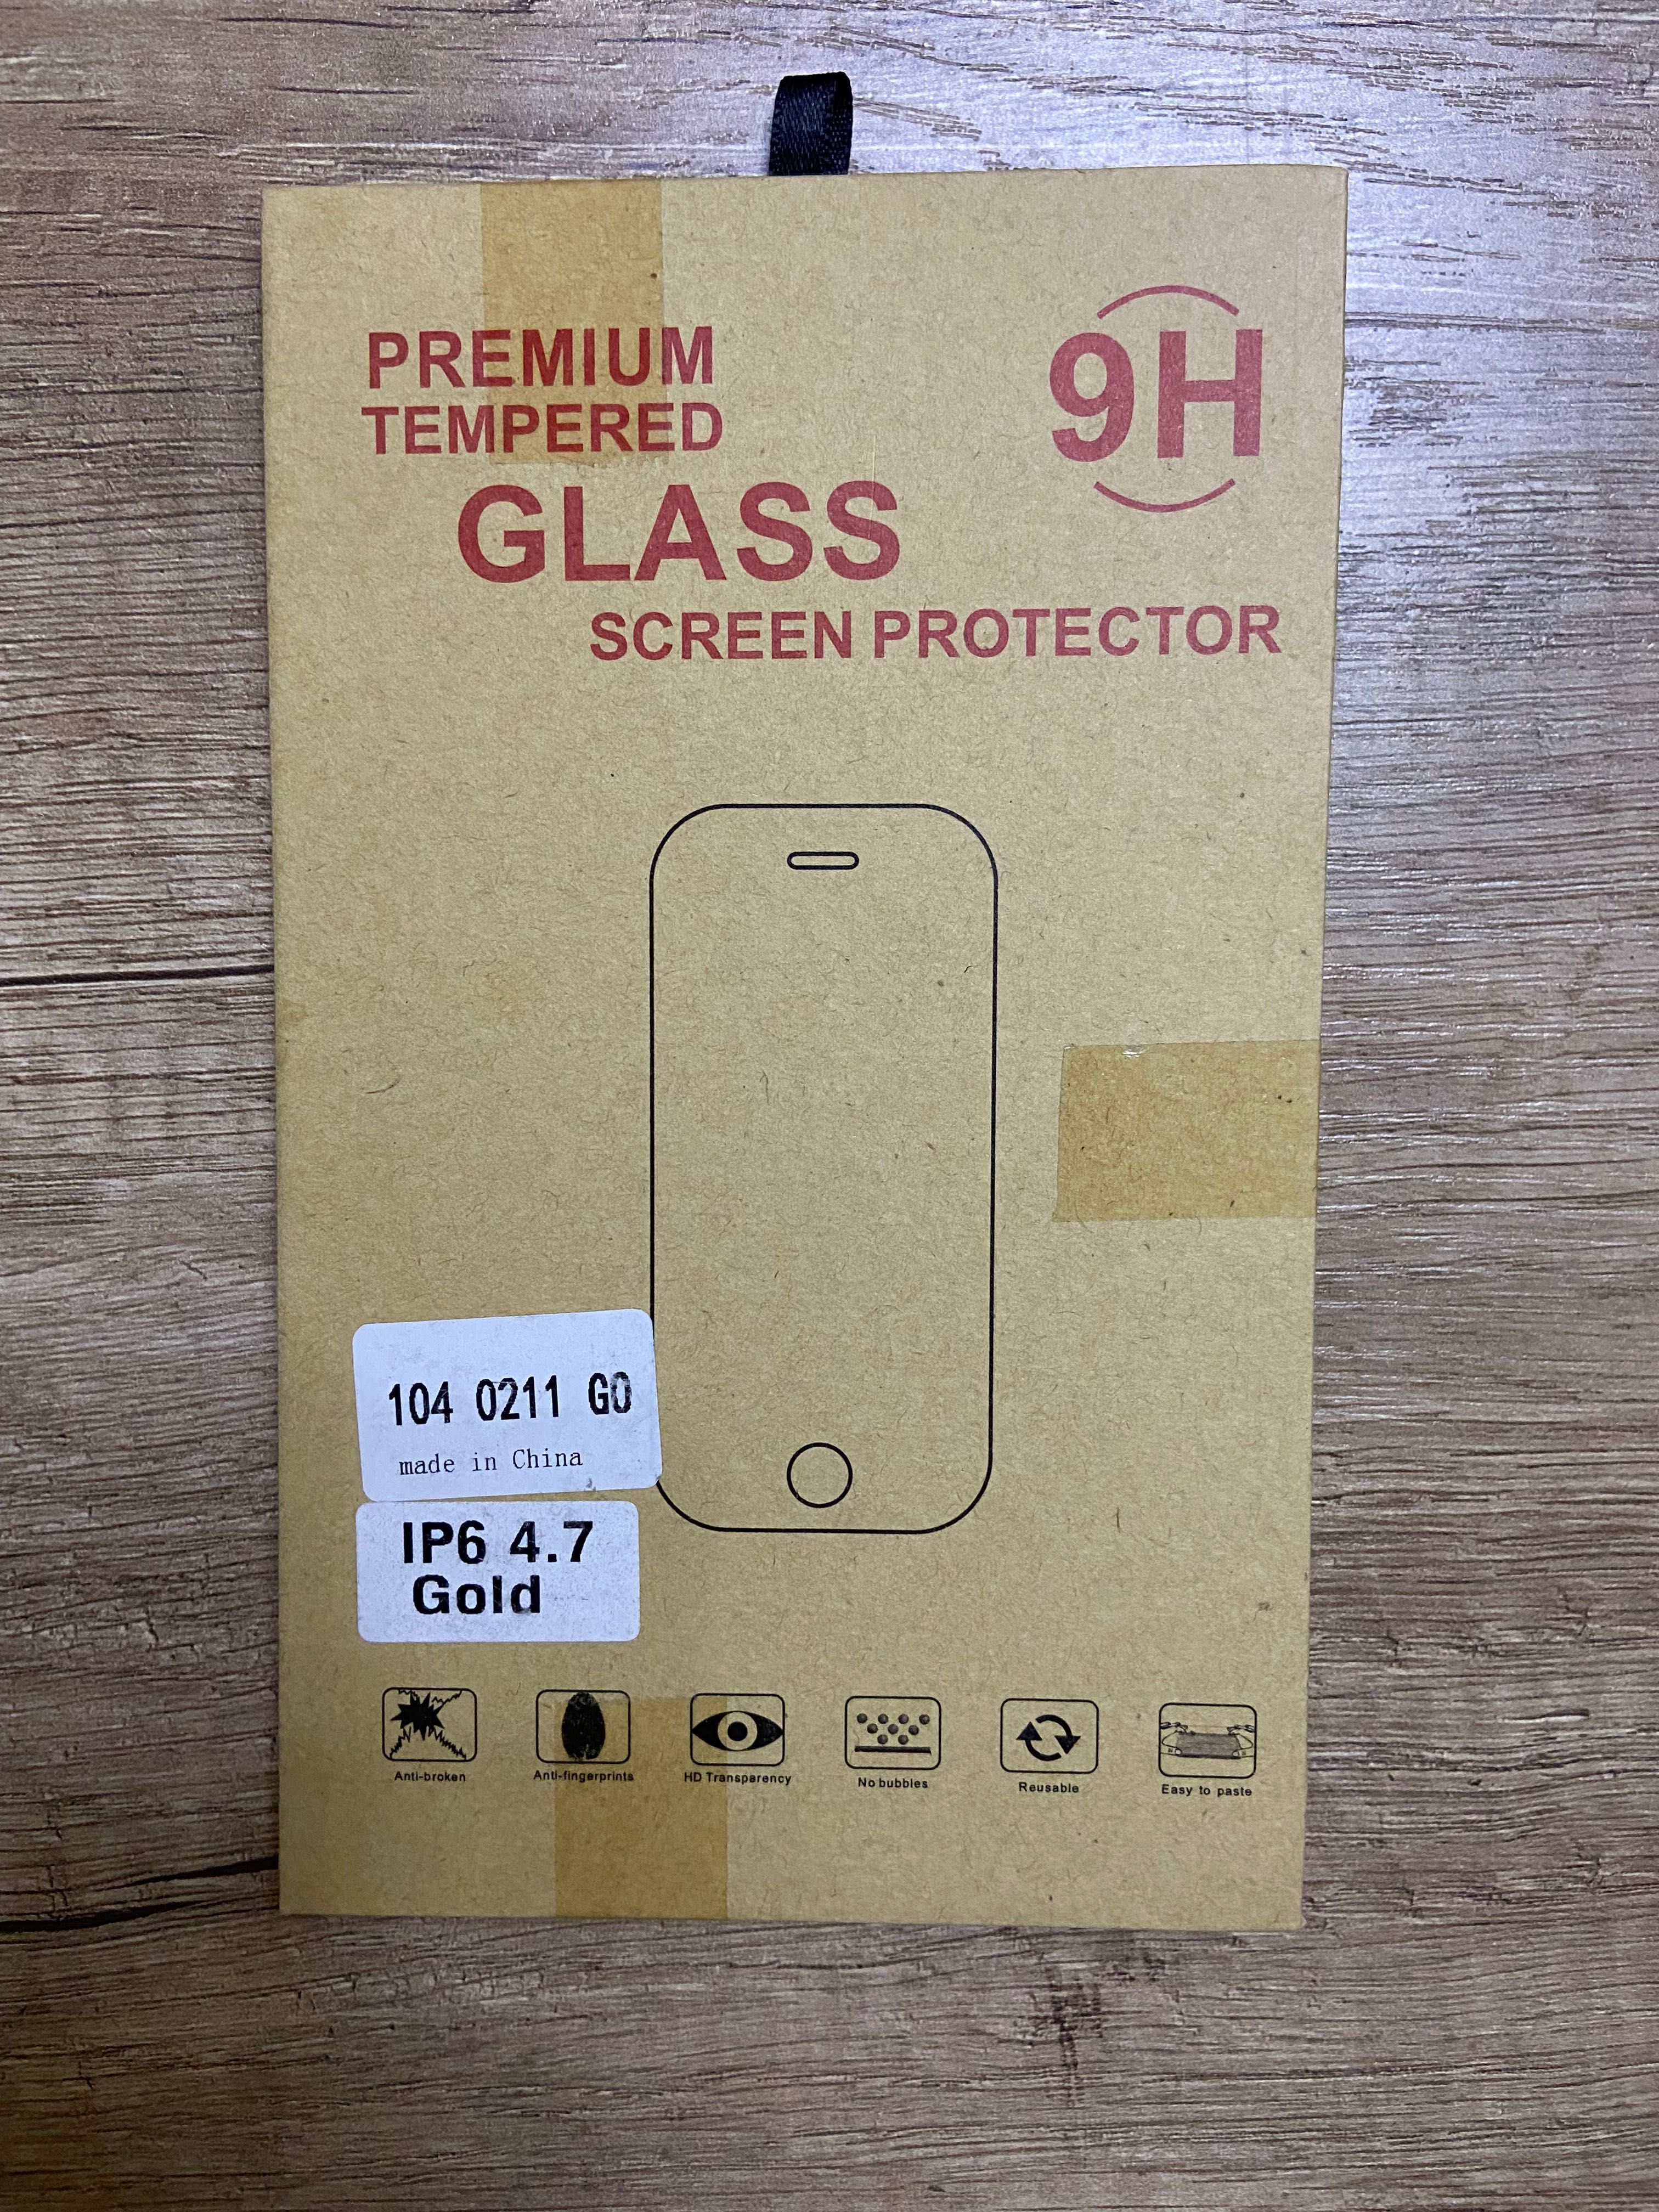 Screen protector for IP6 4.7